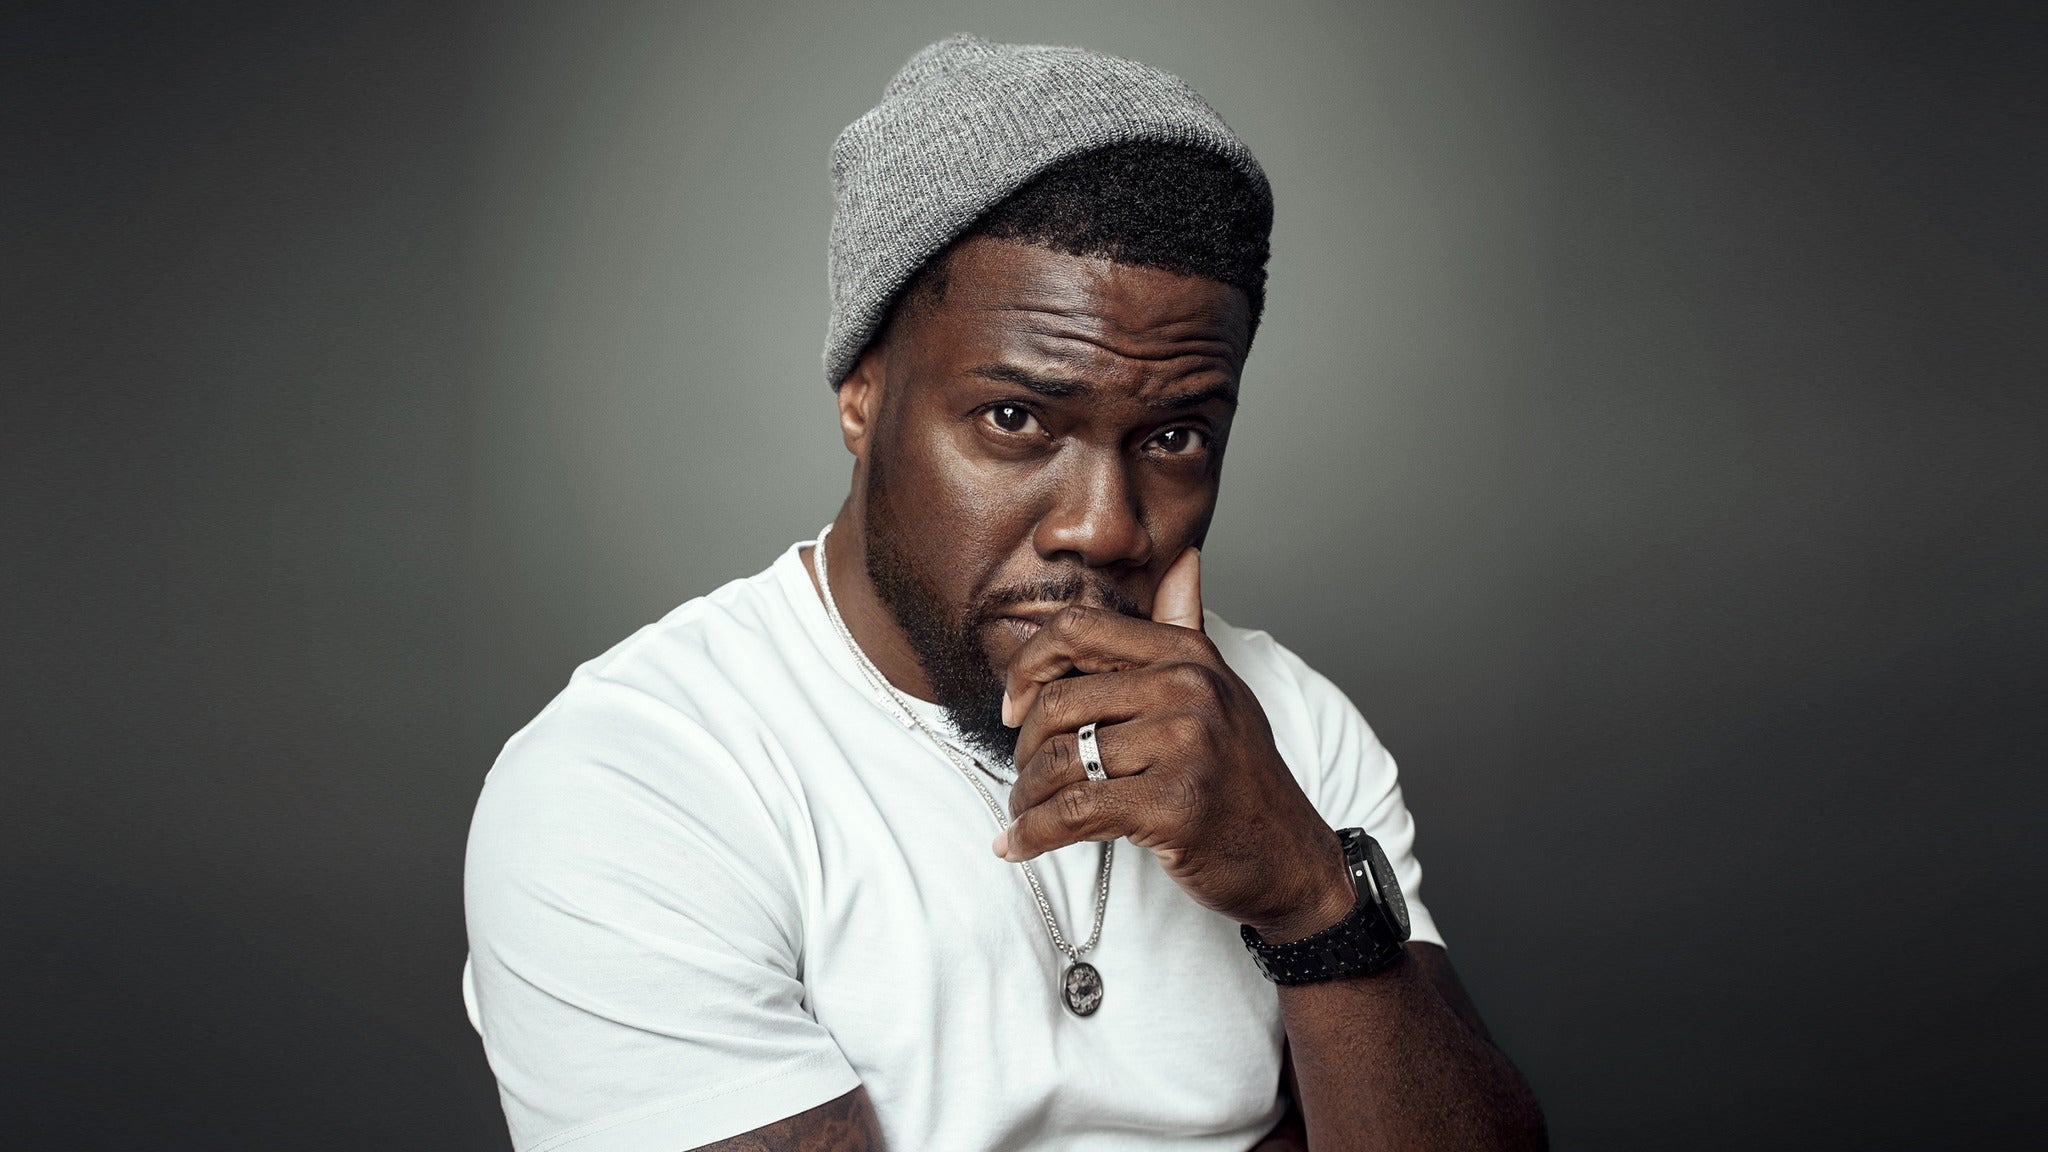 Kevin Hart: Reality Check presale password for early tickets in Denver